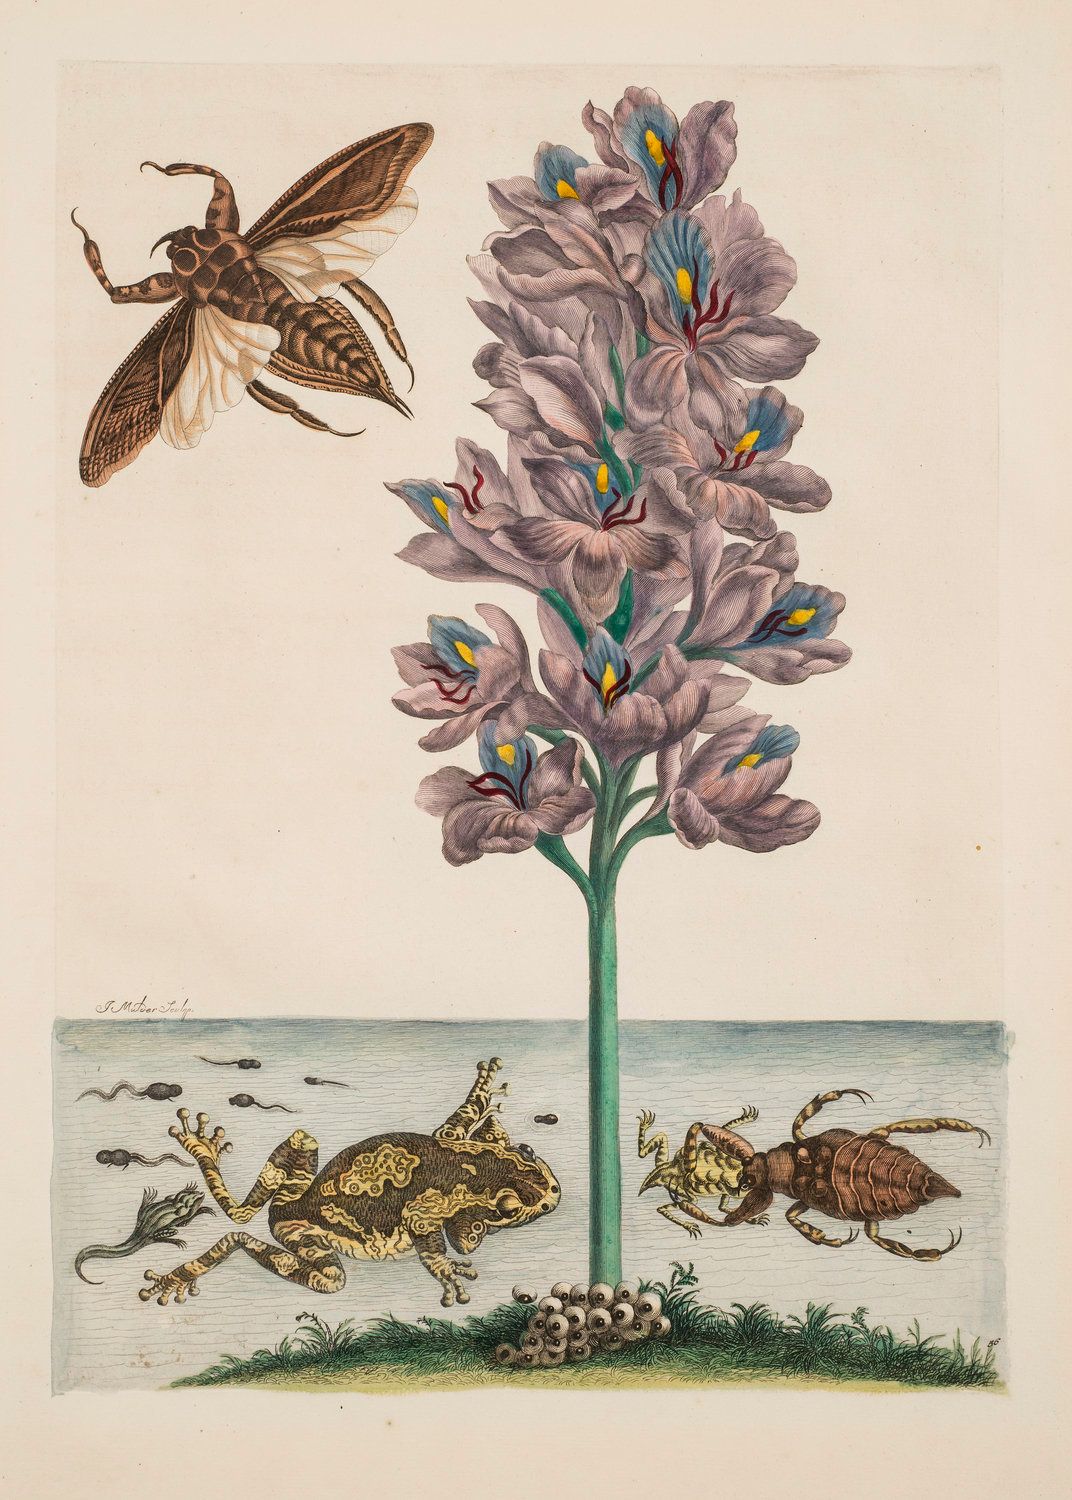 Maria Merian, Plate 56 (from "Dissertation in Insect Generations and Metamorphosis in Surinam", second edition), 1719.